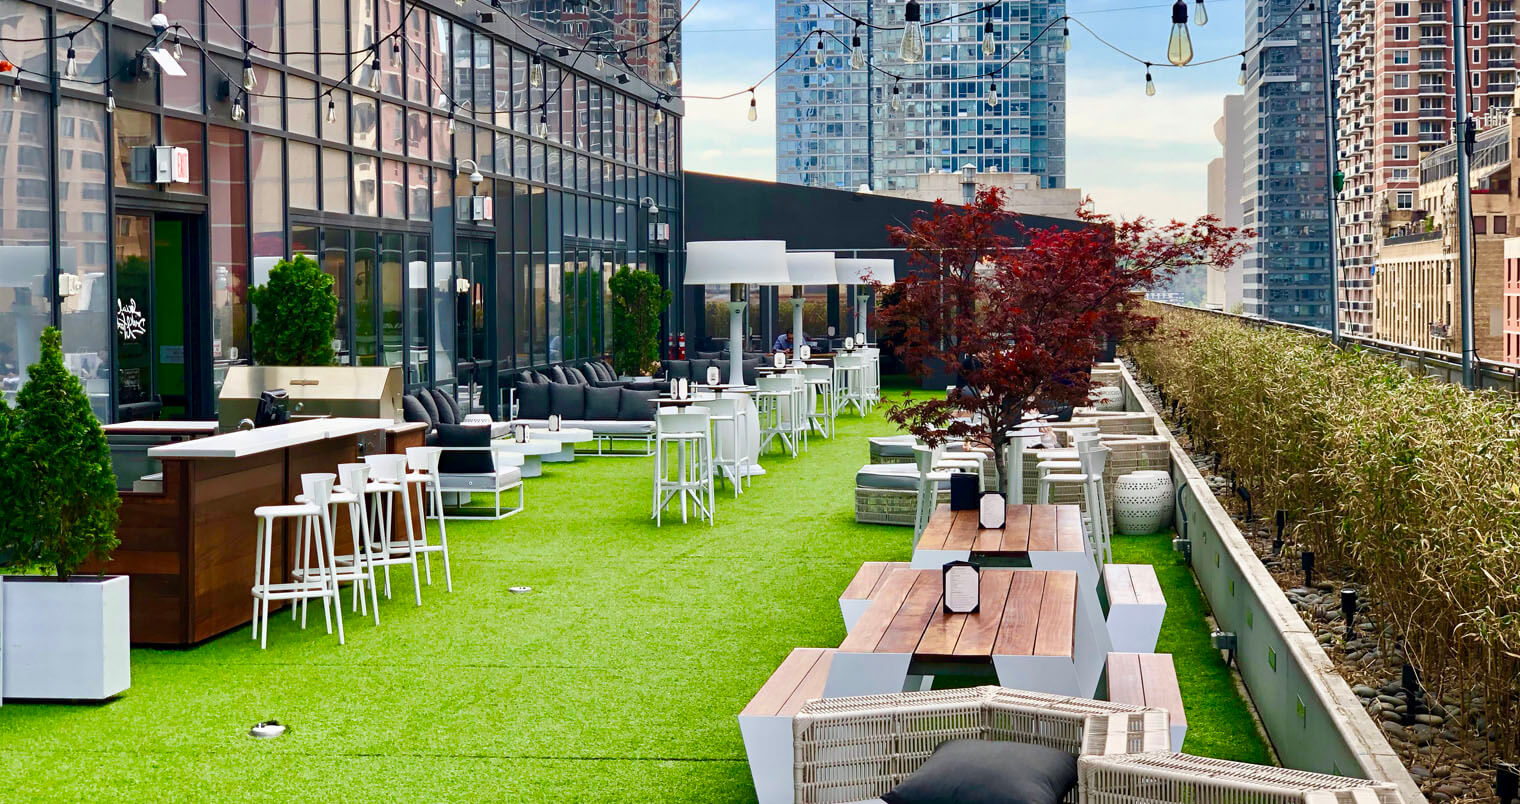 NYC Rooftop Bars featuref image